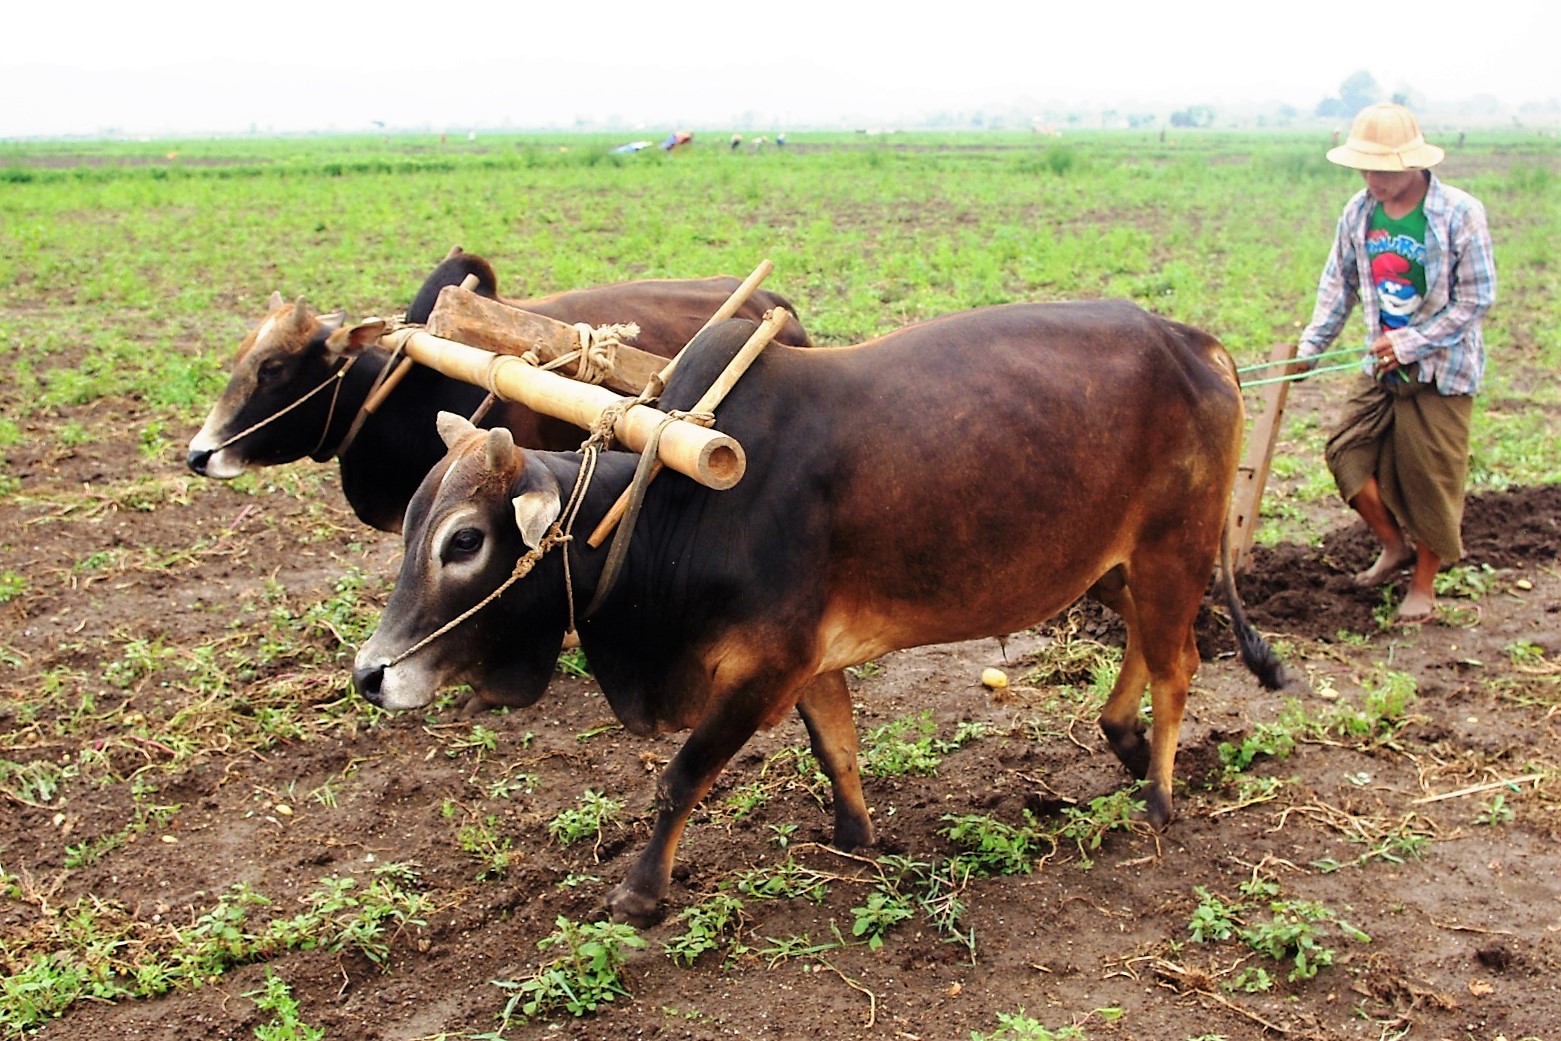 Lifting and harvesting by hand is most labor-intensive. The workload is reduced by using animal power.